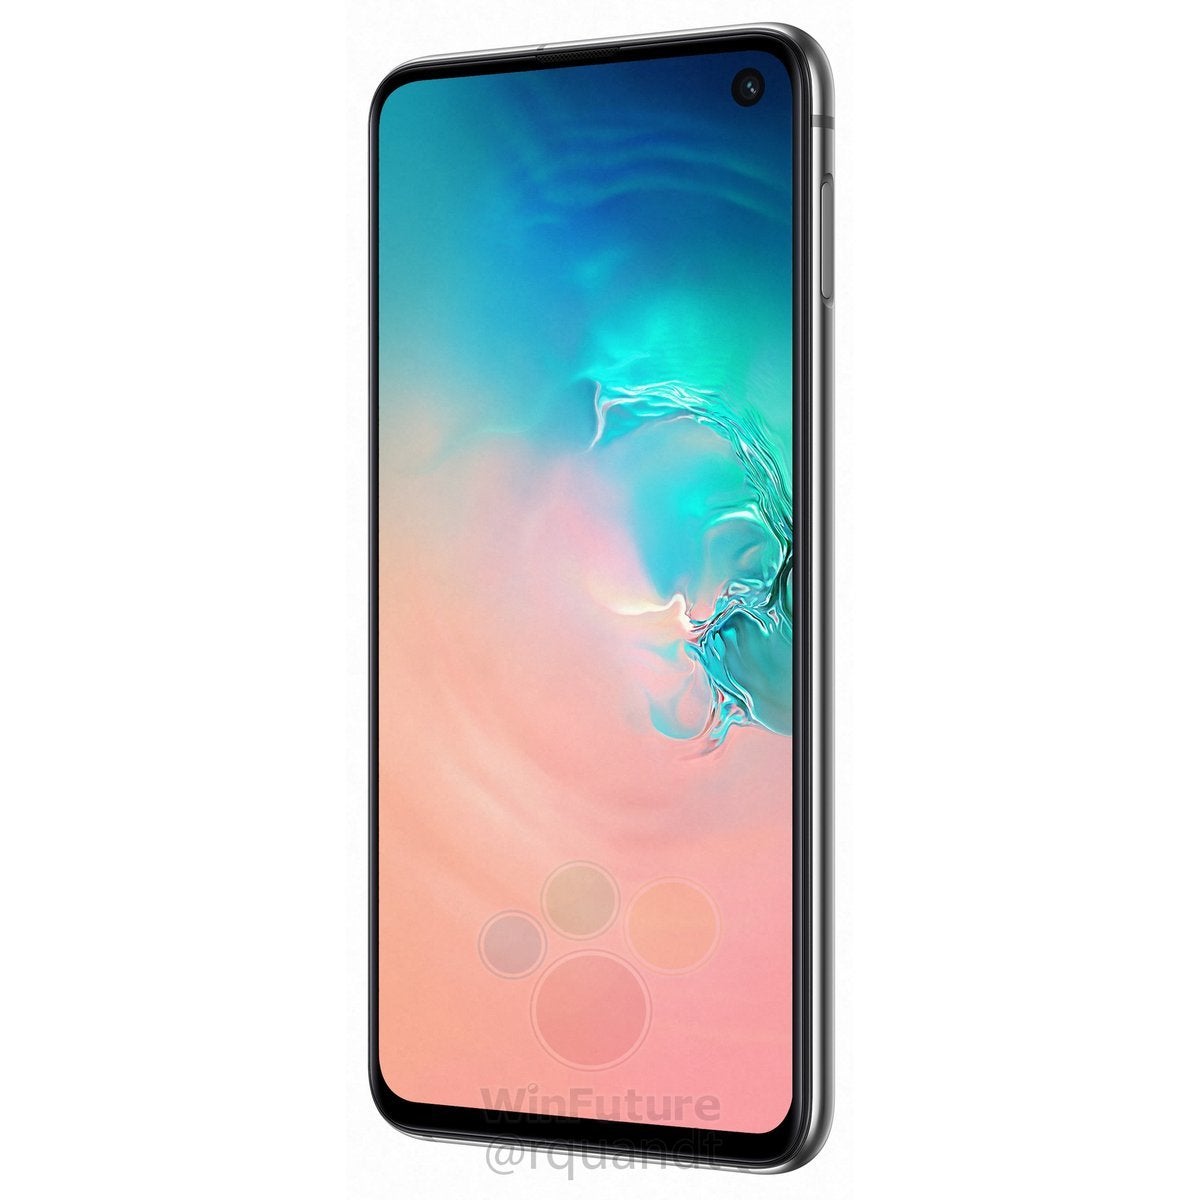 Galaxy S10e, side - Galaxy S10, S10+ and S10e release date, price, news and leaks